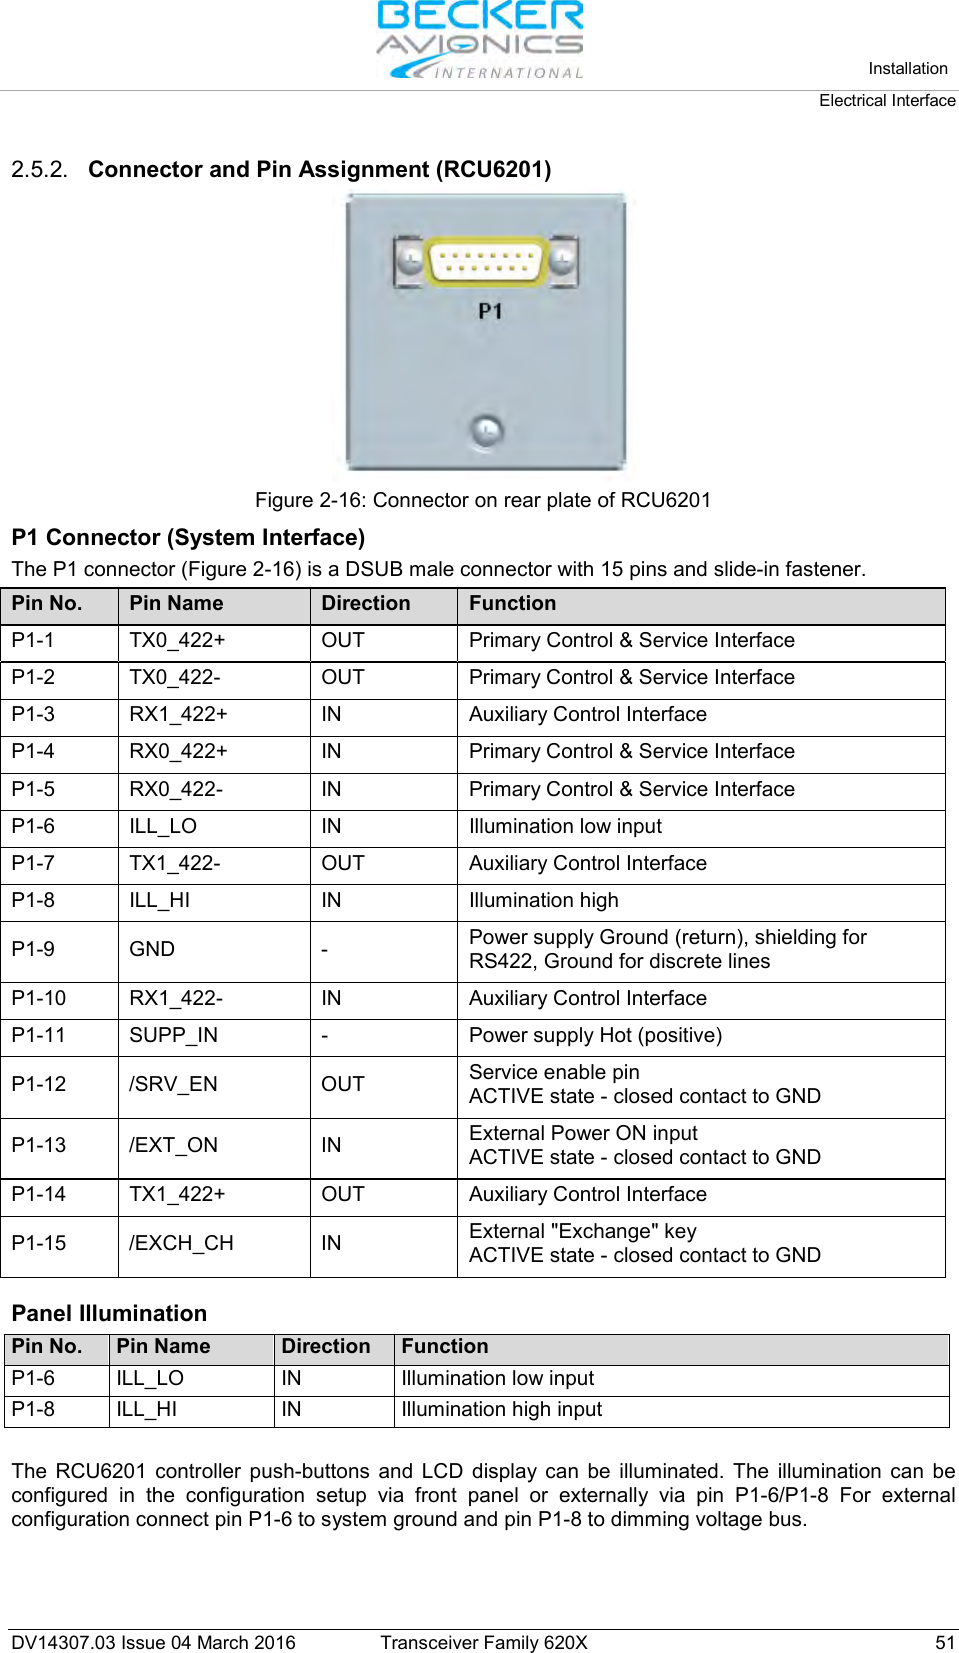   Installation Electrical Interface  DV14307.03 Issue 04 March 2016 Transceiver Family 620X 51  2.5.2. Connector and Pin Assignment (RCU6201)  Figure 2-16: Connector on rear plate of RCU6201 P1 Connector (System Interface) The P1 connector (Figure 2-16) is a DSUB male connector with 15 pins and slide-in fastener. Pin No. Pin Name Direction Function P1-1 TX0_422+ OUT Primary Control &amp; Service Interface P1-2 TX0_422- OUT Primary Control &amp; Service Interface P1-3 RX1_422+ IN Auxiliary Control Interface P1-4 RX0_422+ IN Primary Control &amp; Service Interface P1-5 RX0_422- IN Primary Control &amp; Service Interface P1-6 ILL_LO IN Illumination low input P1-7 TX1_422- OUT Auxiliary Control Interface P1-8 ILL_HI IN Illumination high P1-9  GND  - Power supply Ground (return), shielding for RS422, Ground for discrete lines P1-10 RX1_422- IN Auxiliary Control Interface P1-11 SUPP_IN - Power supply Hot (positive) P1-12 /SRV_EN OUT Service enable pin ACTIVE state - closed contact to GND P1-13 /EXT_ON IN External Power ON input ACTIVE state - closed contact to GND P1-14 TX1_422+ OUT Auxiliary Control Interface P1-15 /EXCH_CH IN External &quot;Exchange&quot; key ACTIVE state - closed contact to GND   Panel Illumination Pin No. Pin Name Direction Function P1-6 ILL_LO IN Illumination low input P1-8 ILL_HI IN Illumination high input  The RCU6201 controller push-buttons and LCD display can be illuminated. The illumination can be configured in the configuration setup via front panel or externally via pin P1-6/P1-8 For external configuration connect pin P1-6 to system ground and pin P1-8 to dimming voltage bus. 